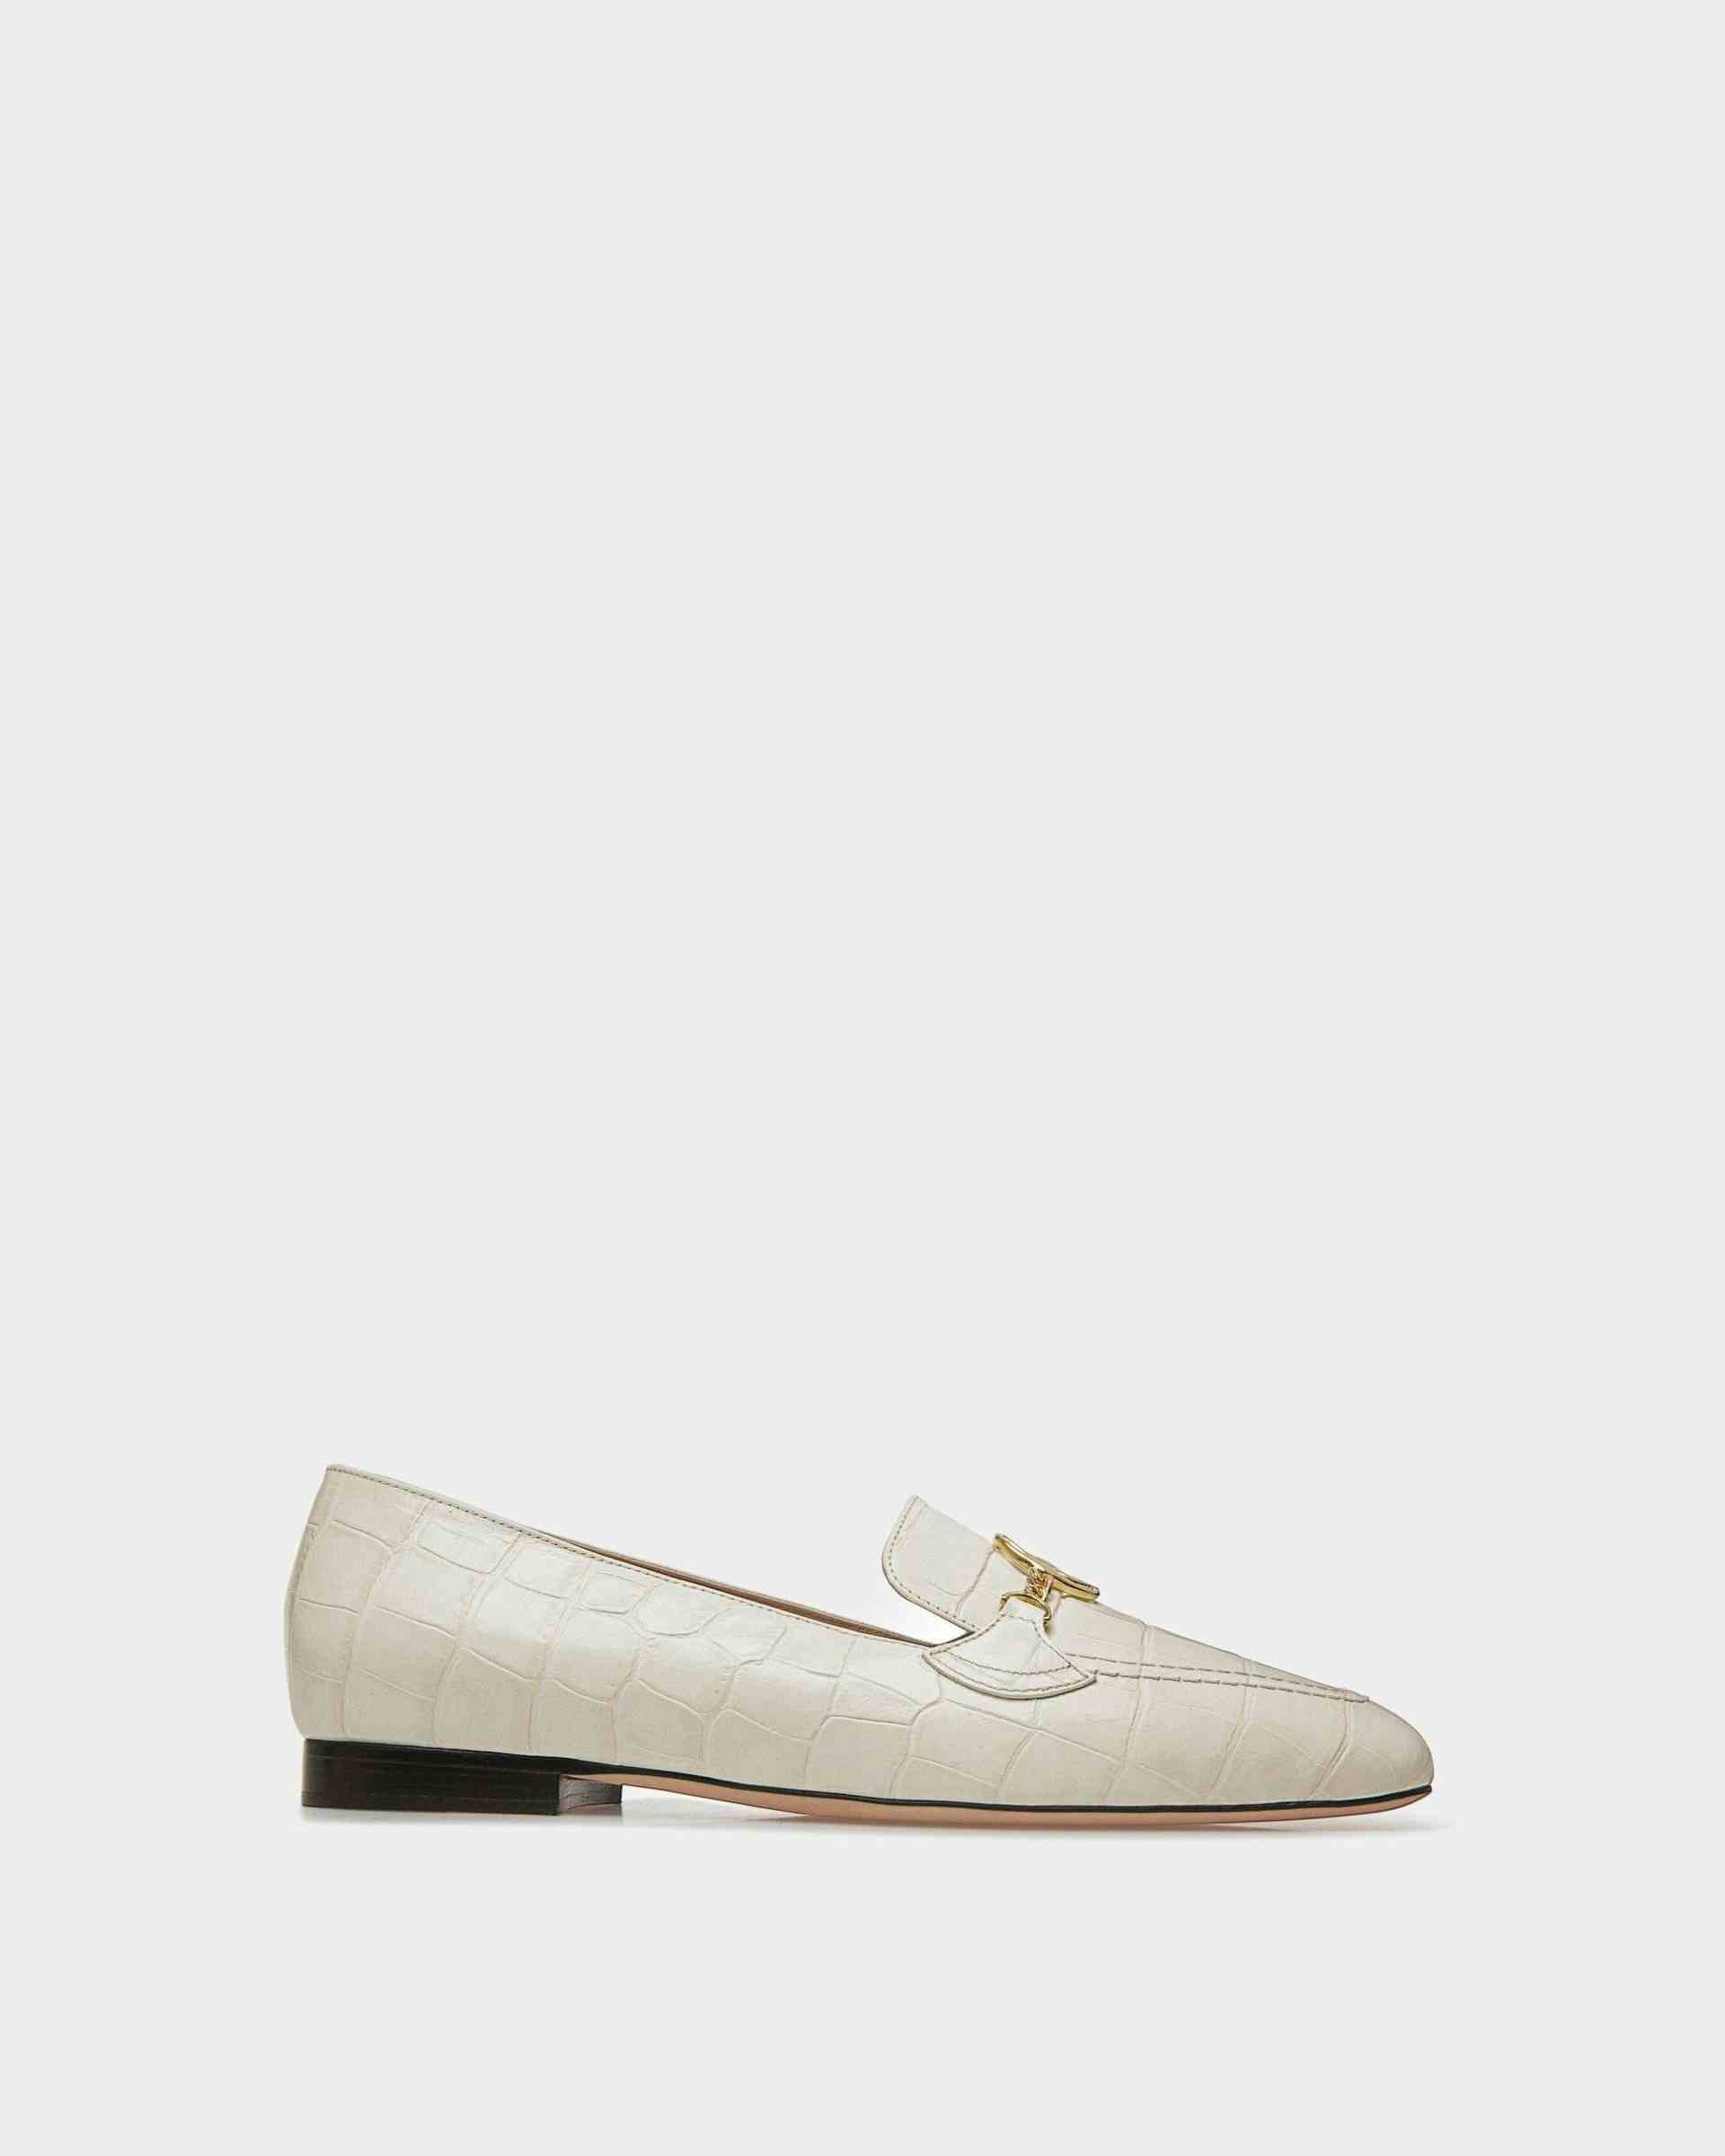 Daily Emblem Loafer In Bone Leather - Women's - Bally